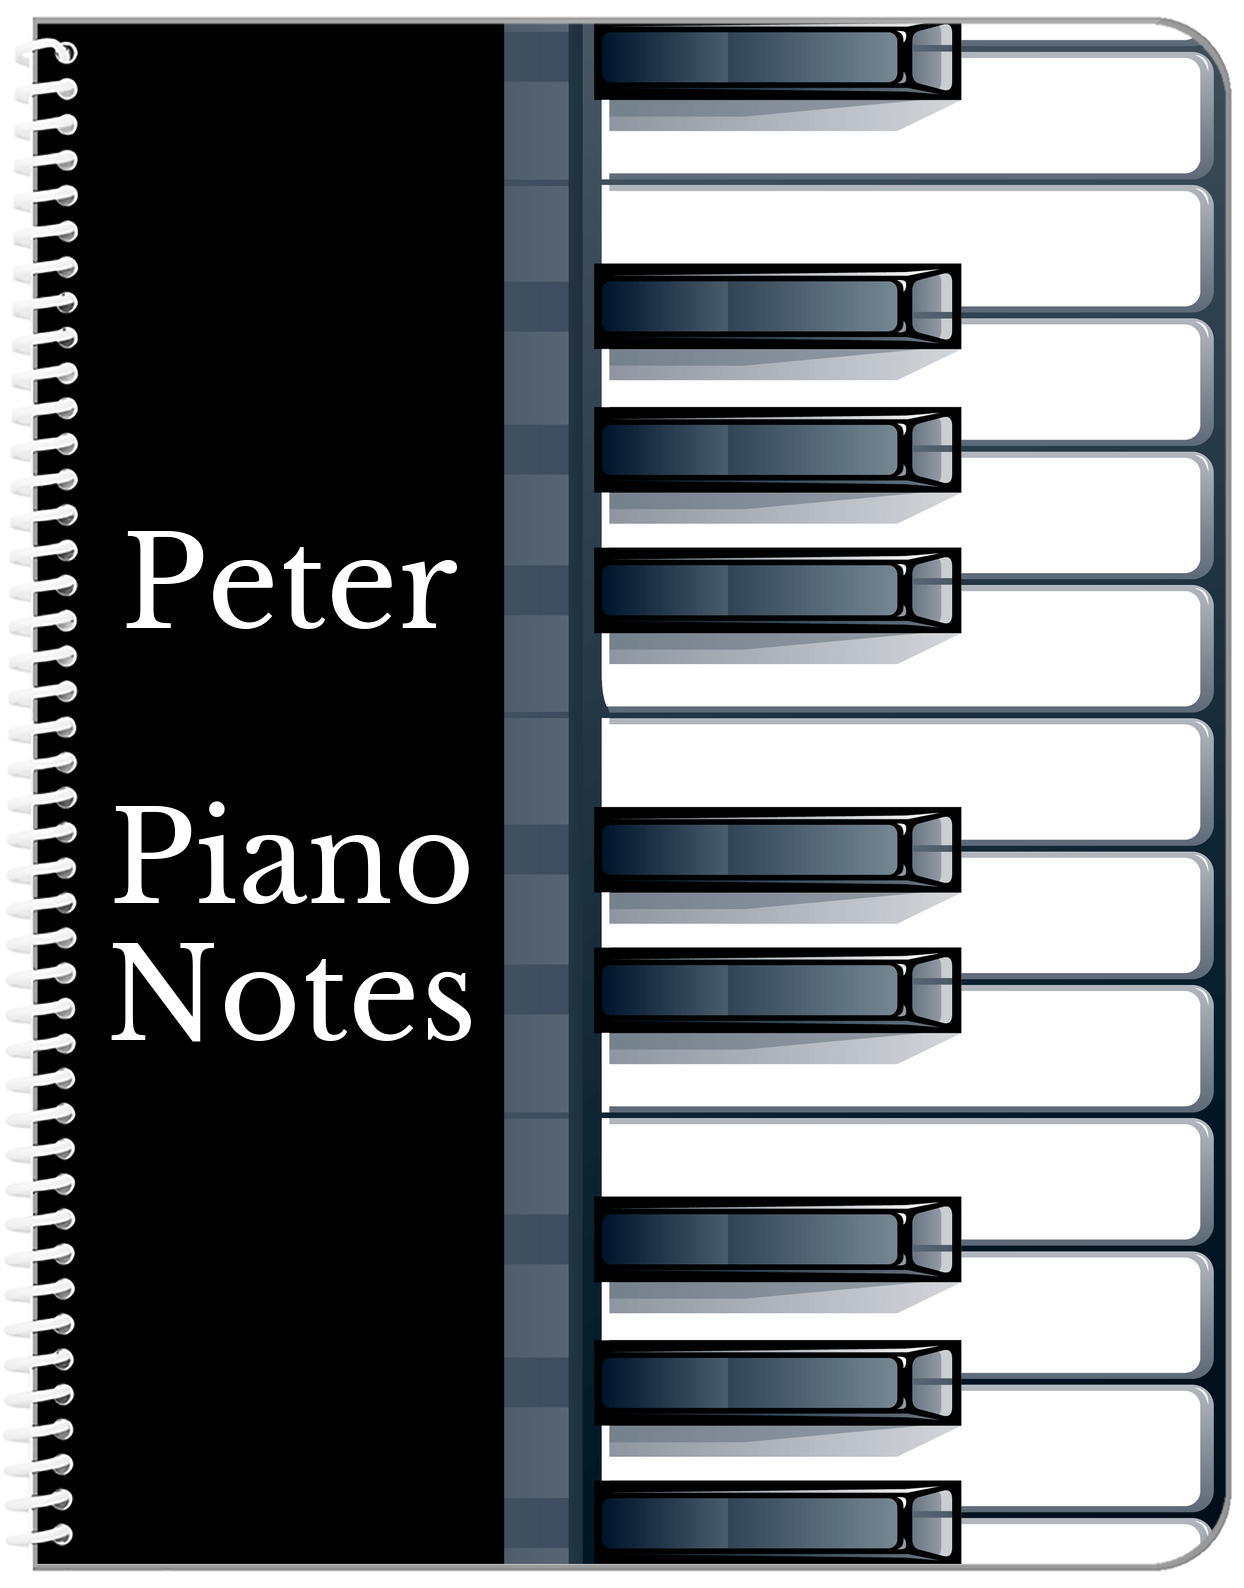 Personalized Piano Keys Notebook - Black Background II - Front View